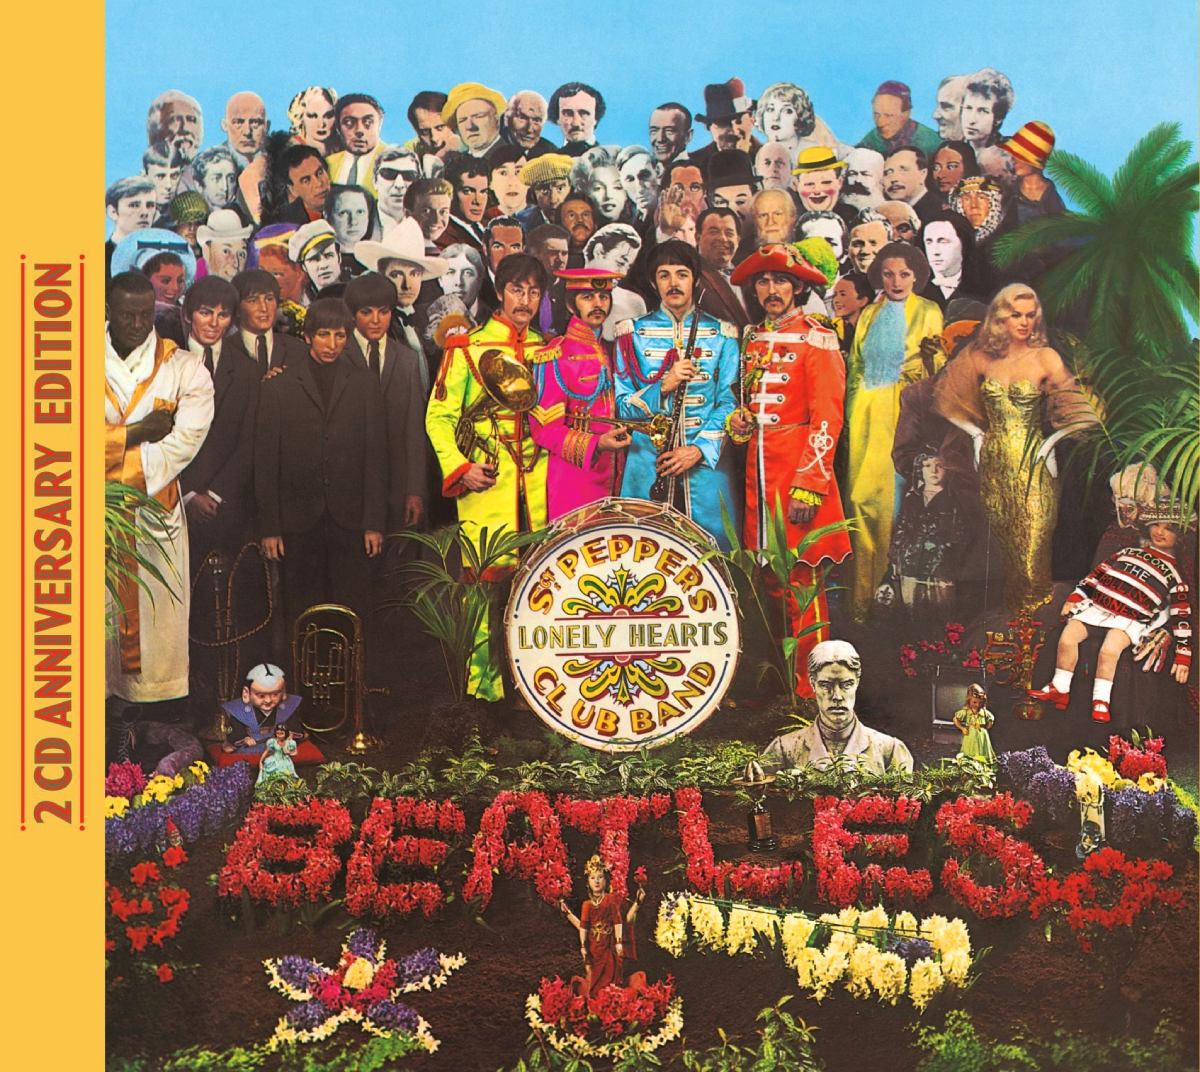 Sgt. Pepper's Lonely Hearts Club Band (Beatles album)